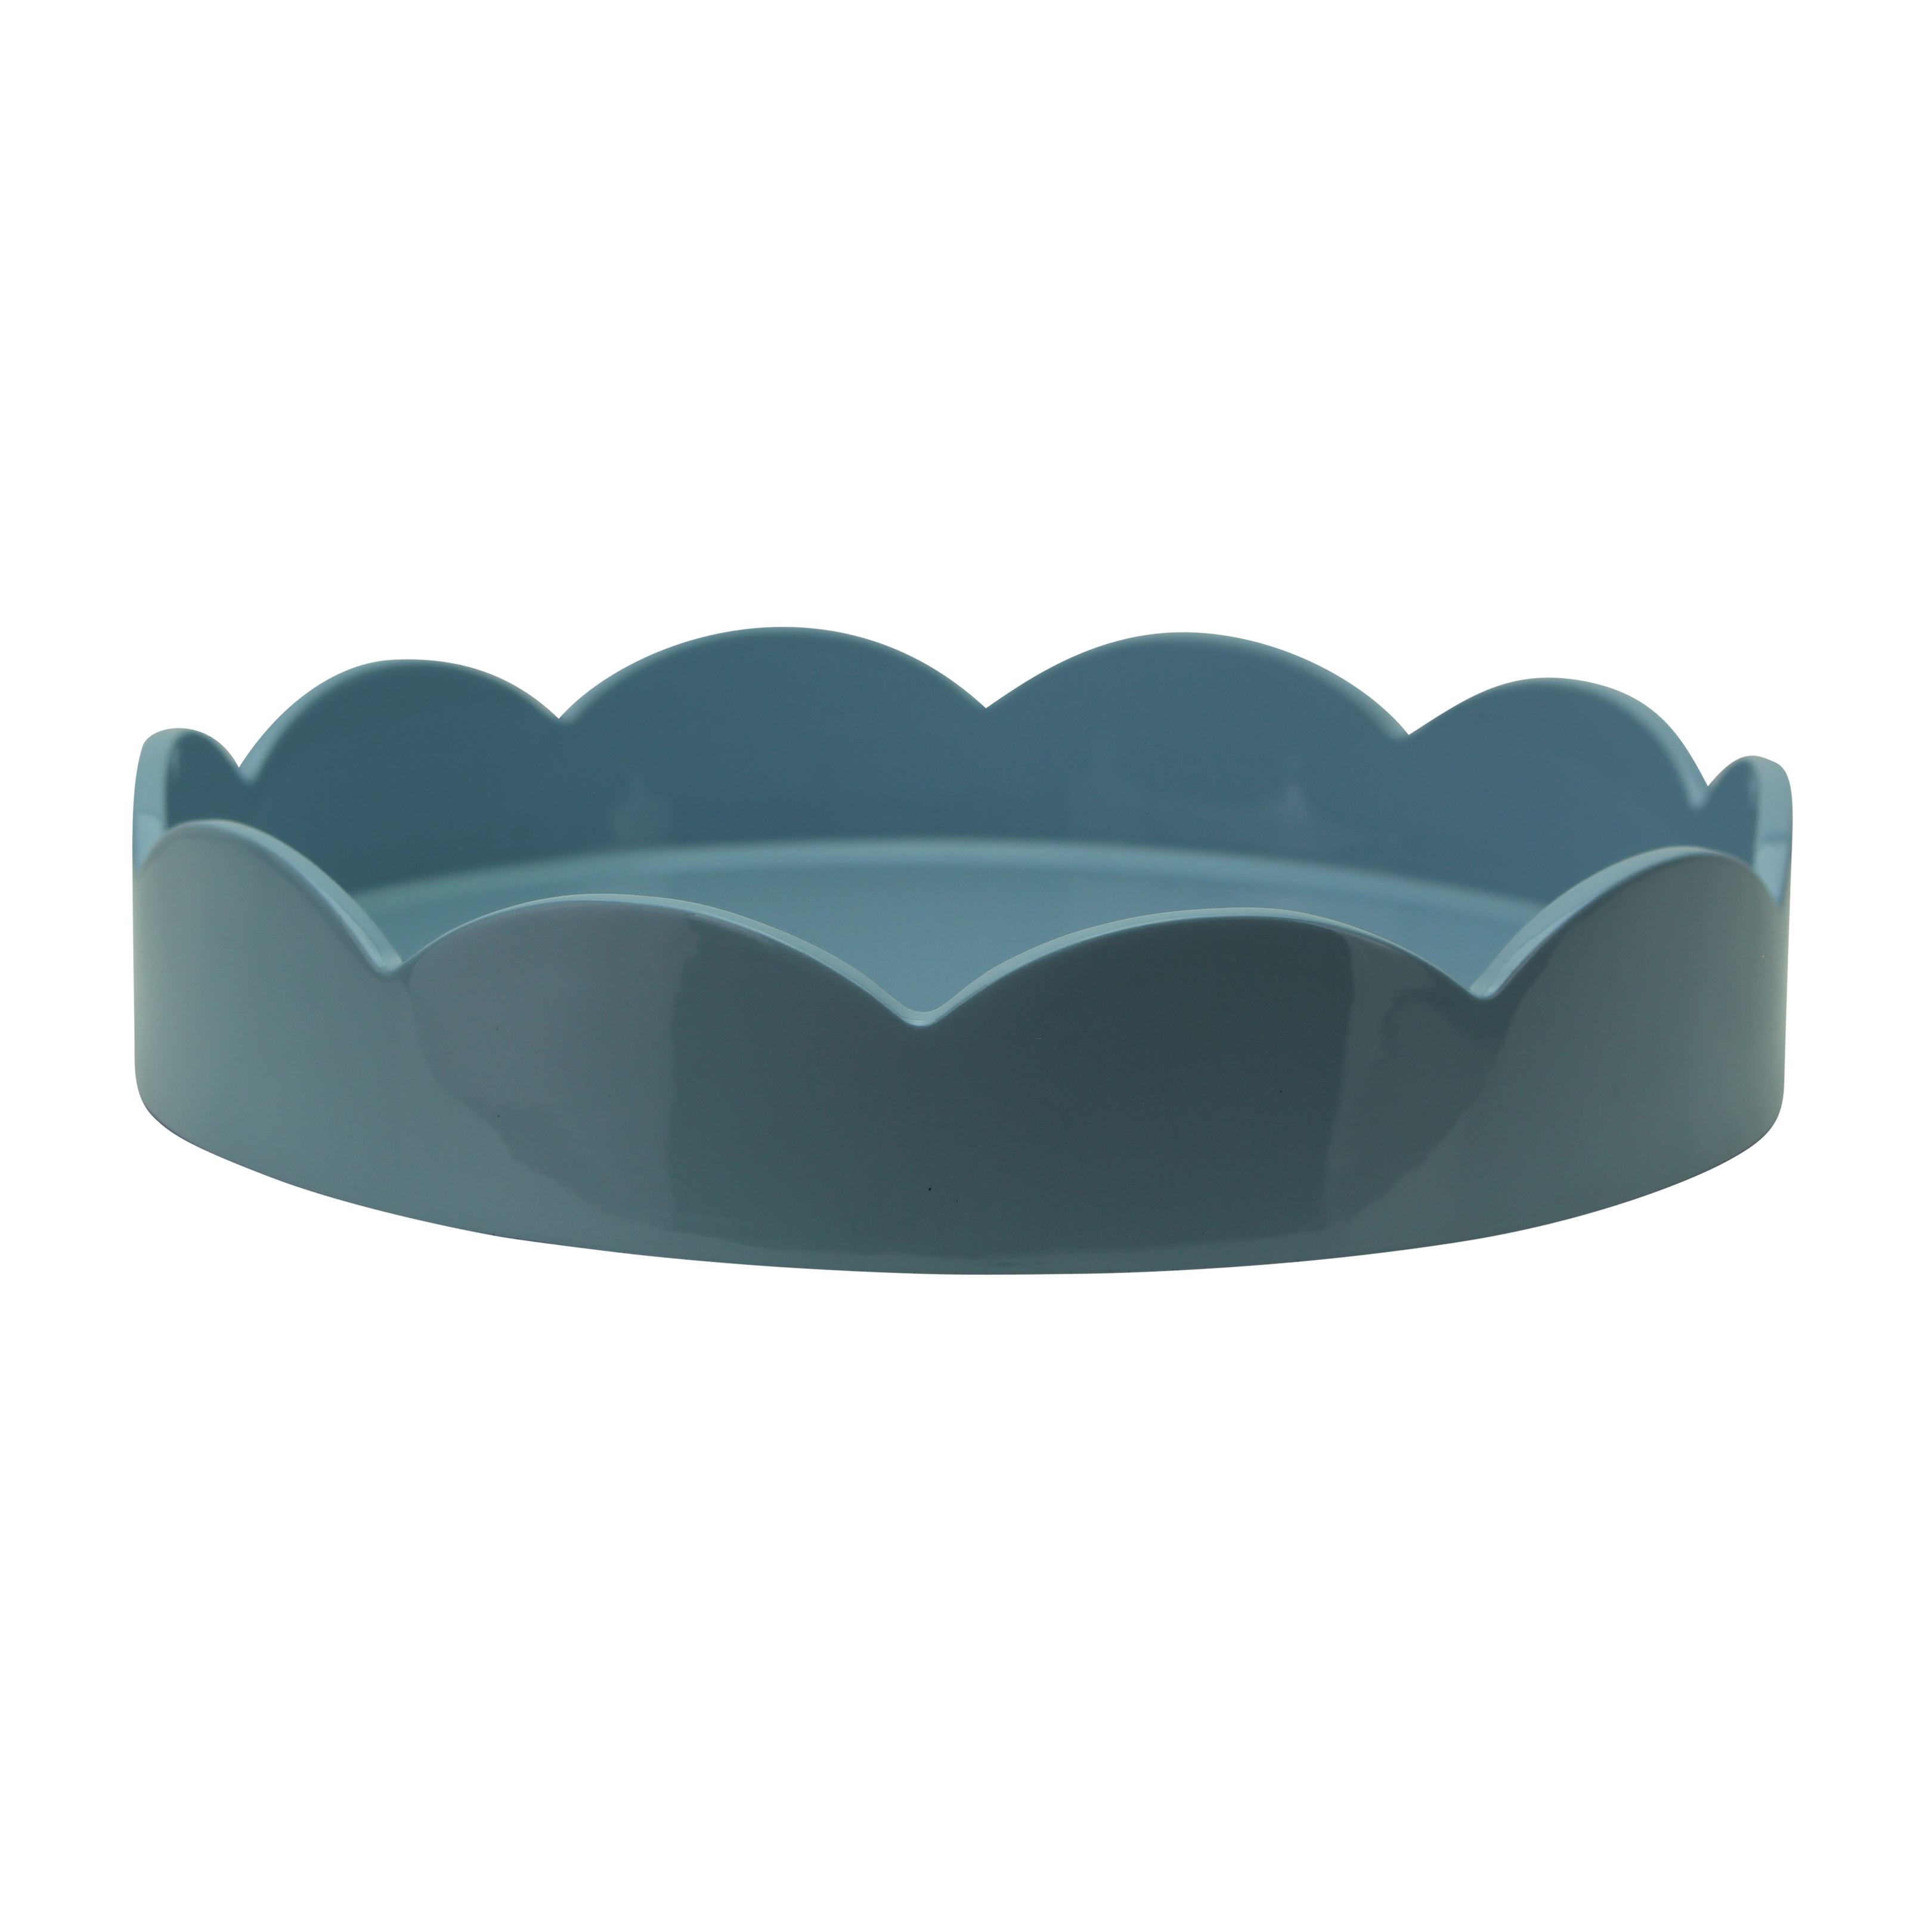 Round scalloped tray in pale denim blue